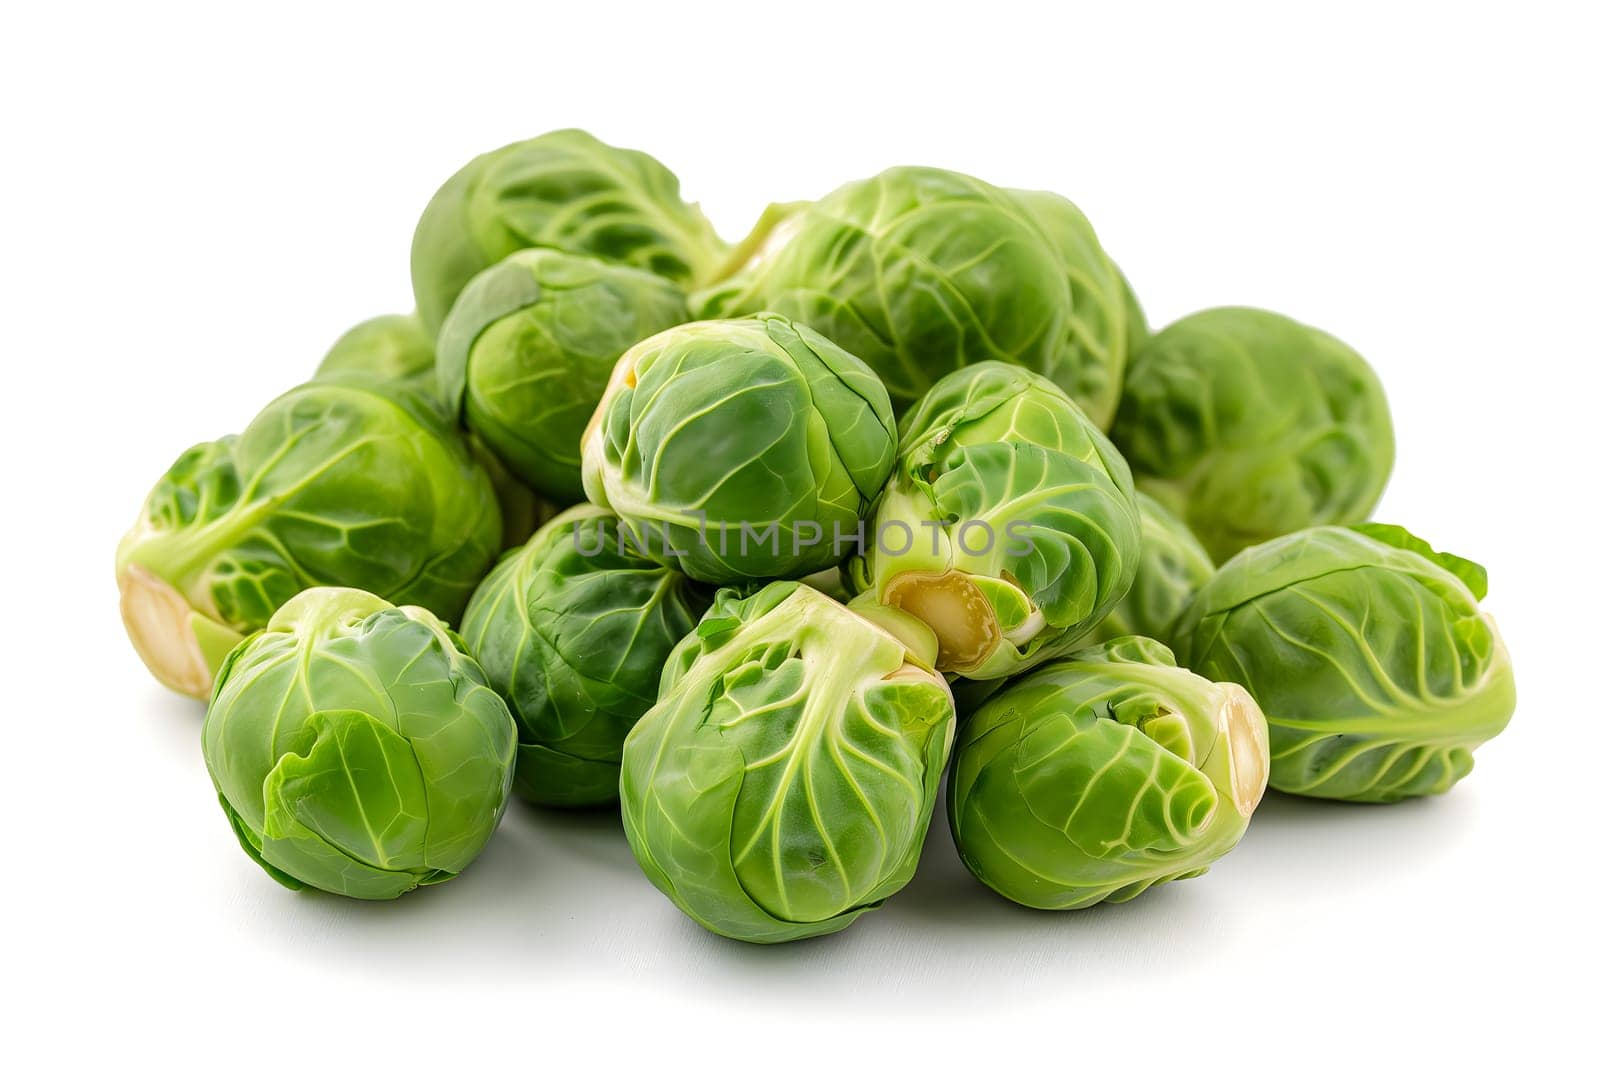 Small heap of brussels sprouts on white background by z1b